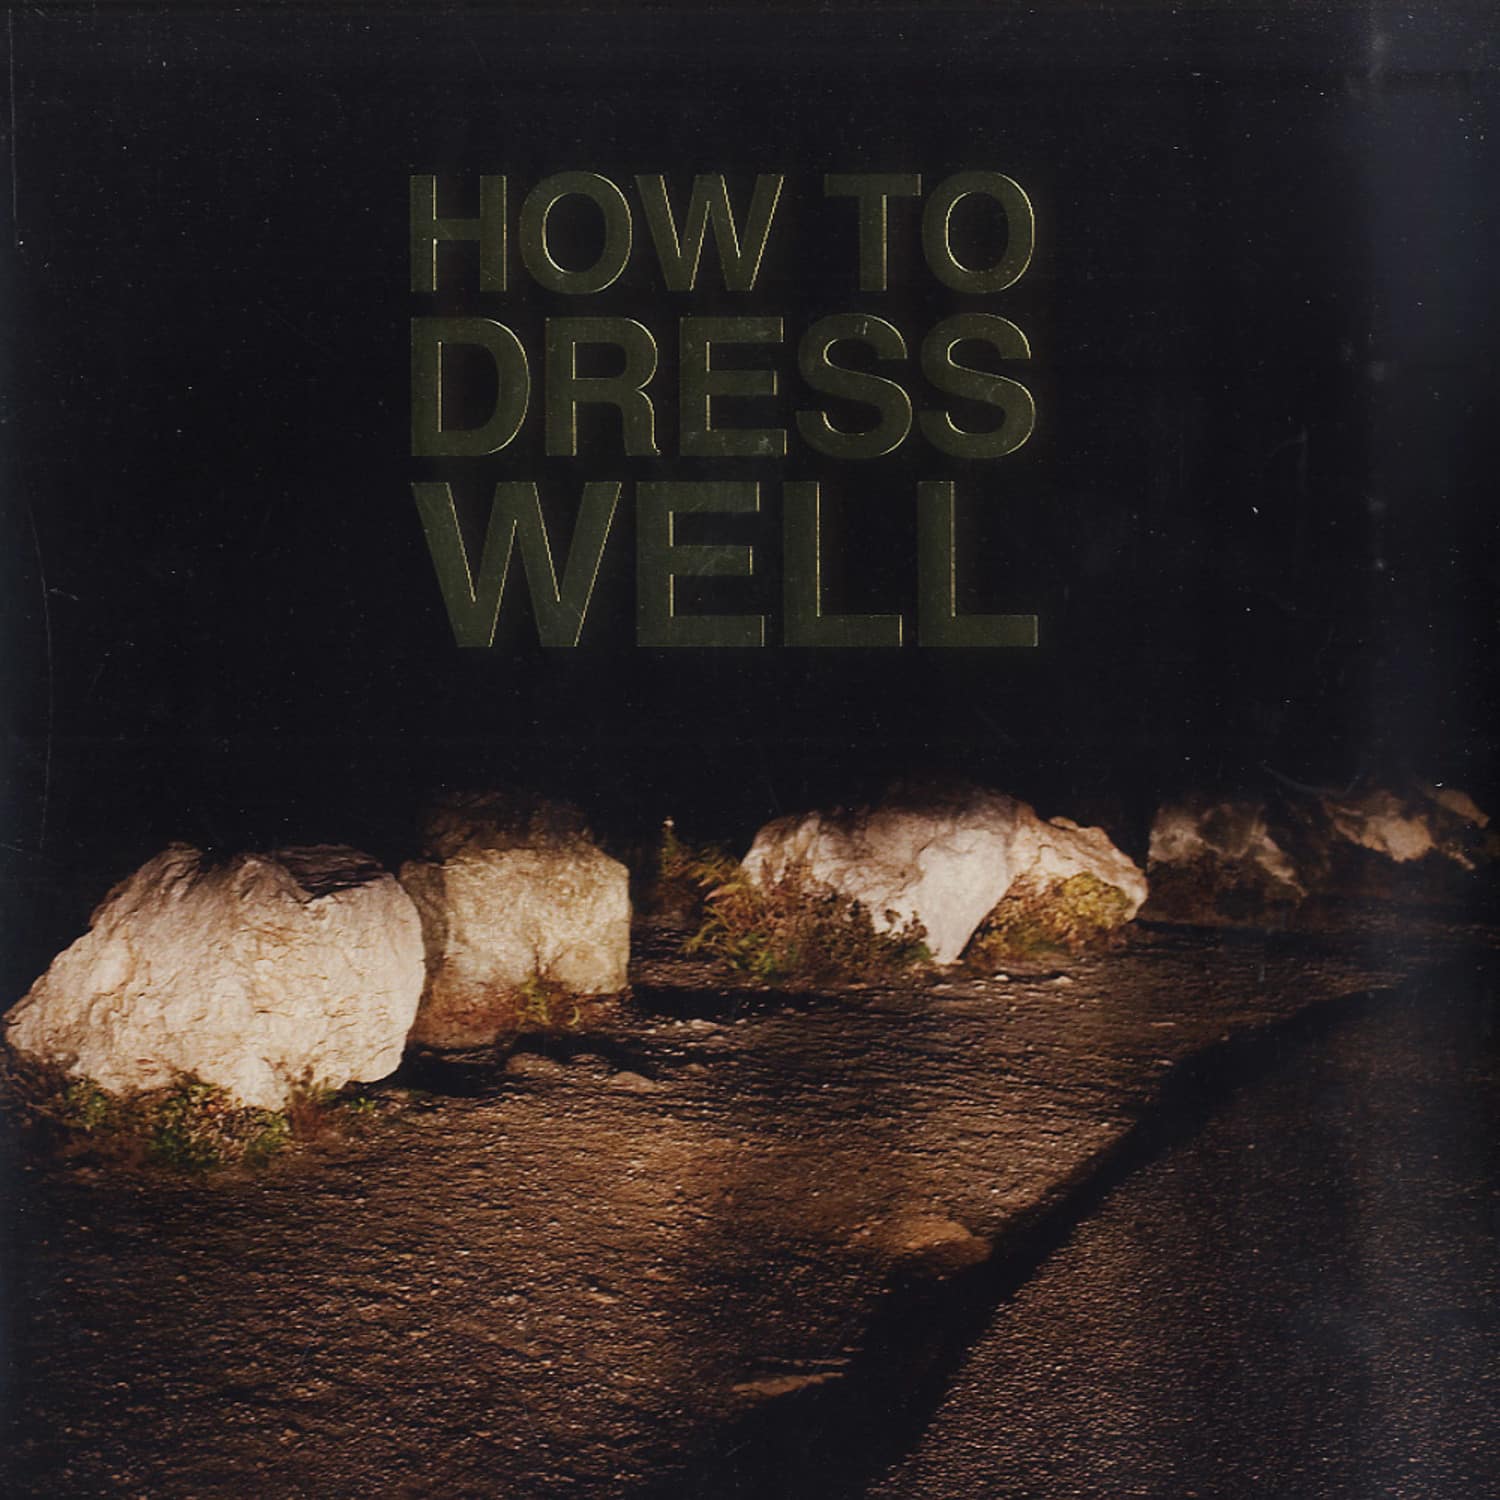 How To Dress Well - LOVE REMAINS 